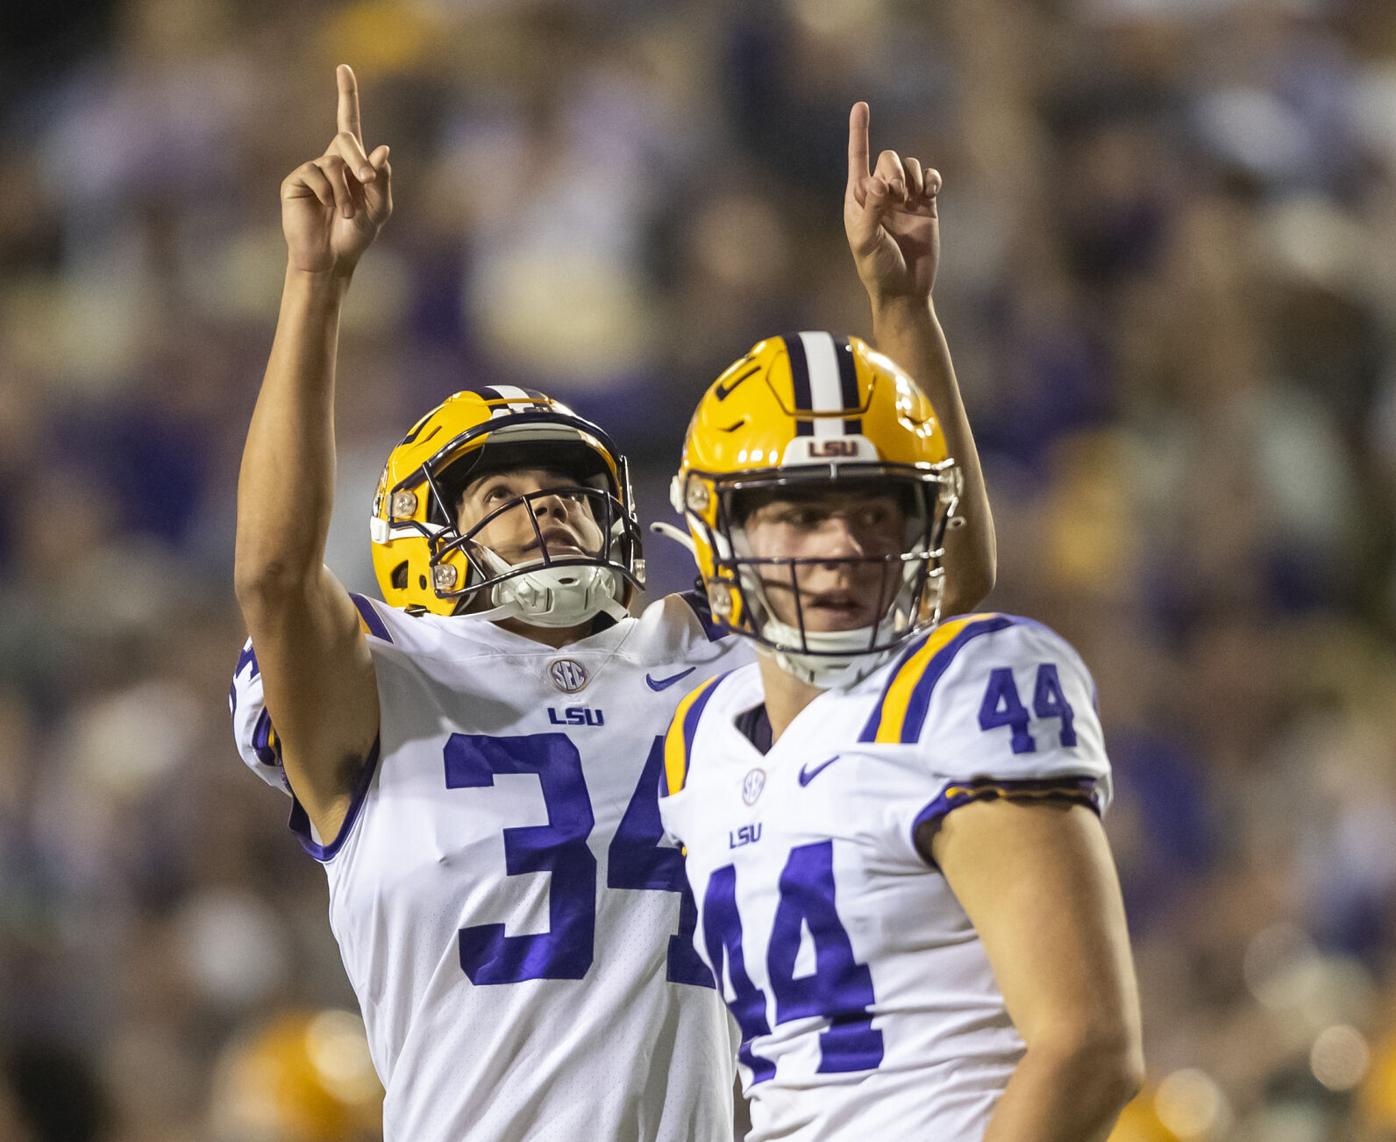 LSU Colors: Purple and Gold a Proud Tradition Since 1893